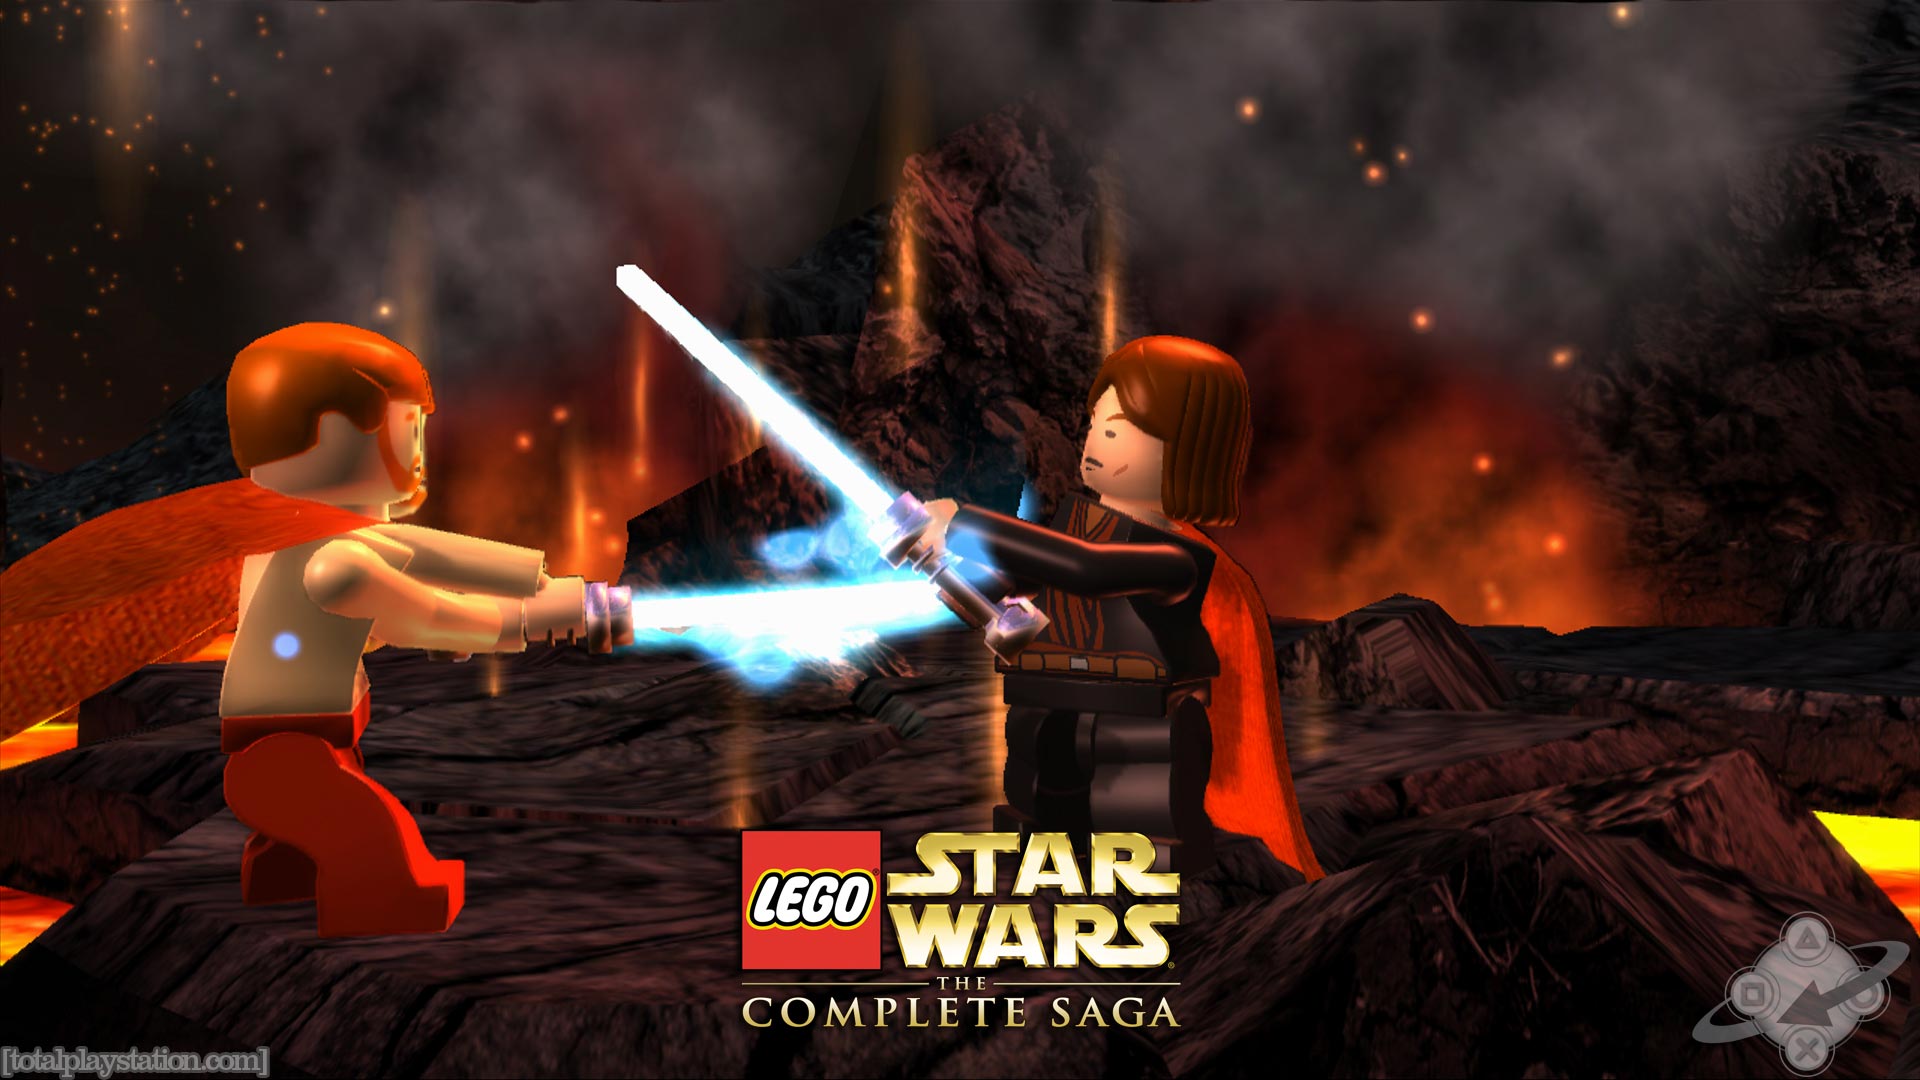 Free download Lego Star Wars Characters Wallpaper 1920x1080px [1920x1080] for your Desktop, Mobile & Tablet. Explore Lego Star Wars Wallpaper. Star Wars Star Background, Star Wars Background, Star Wars Wallpaper